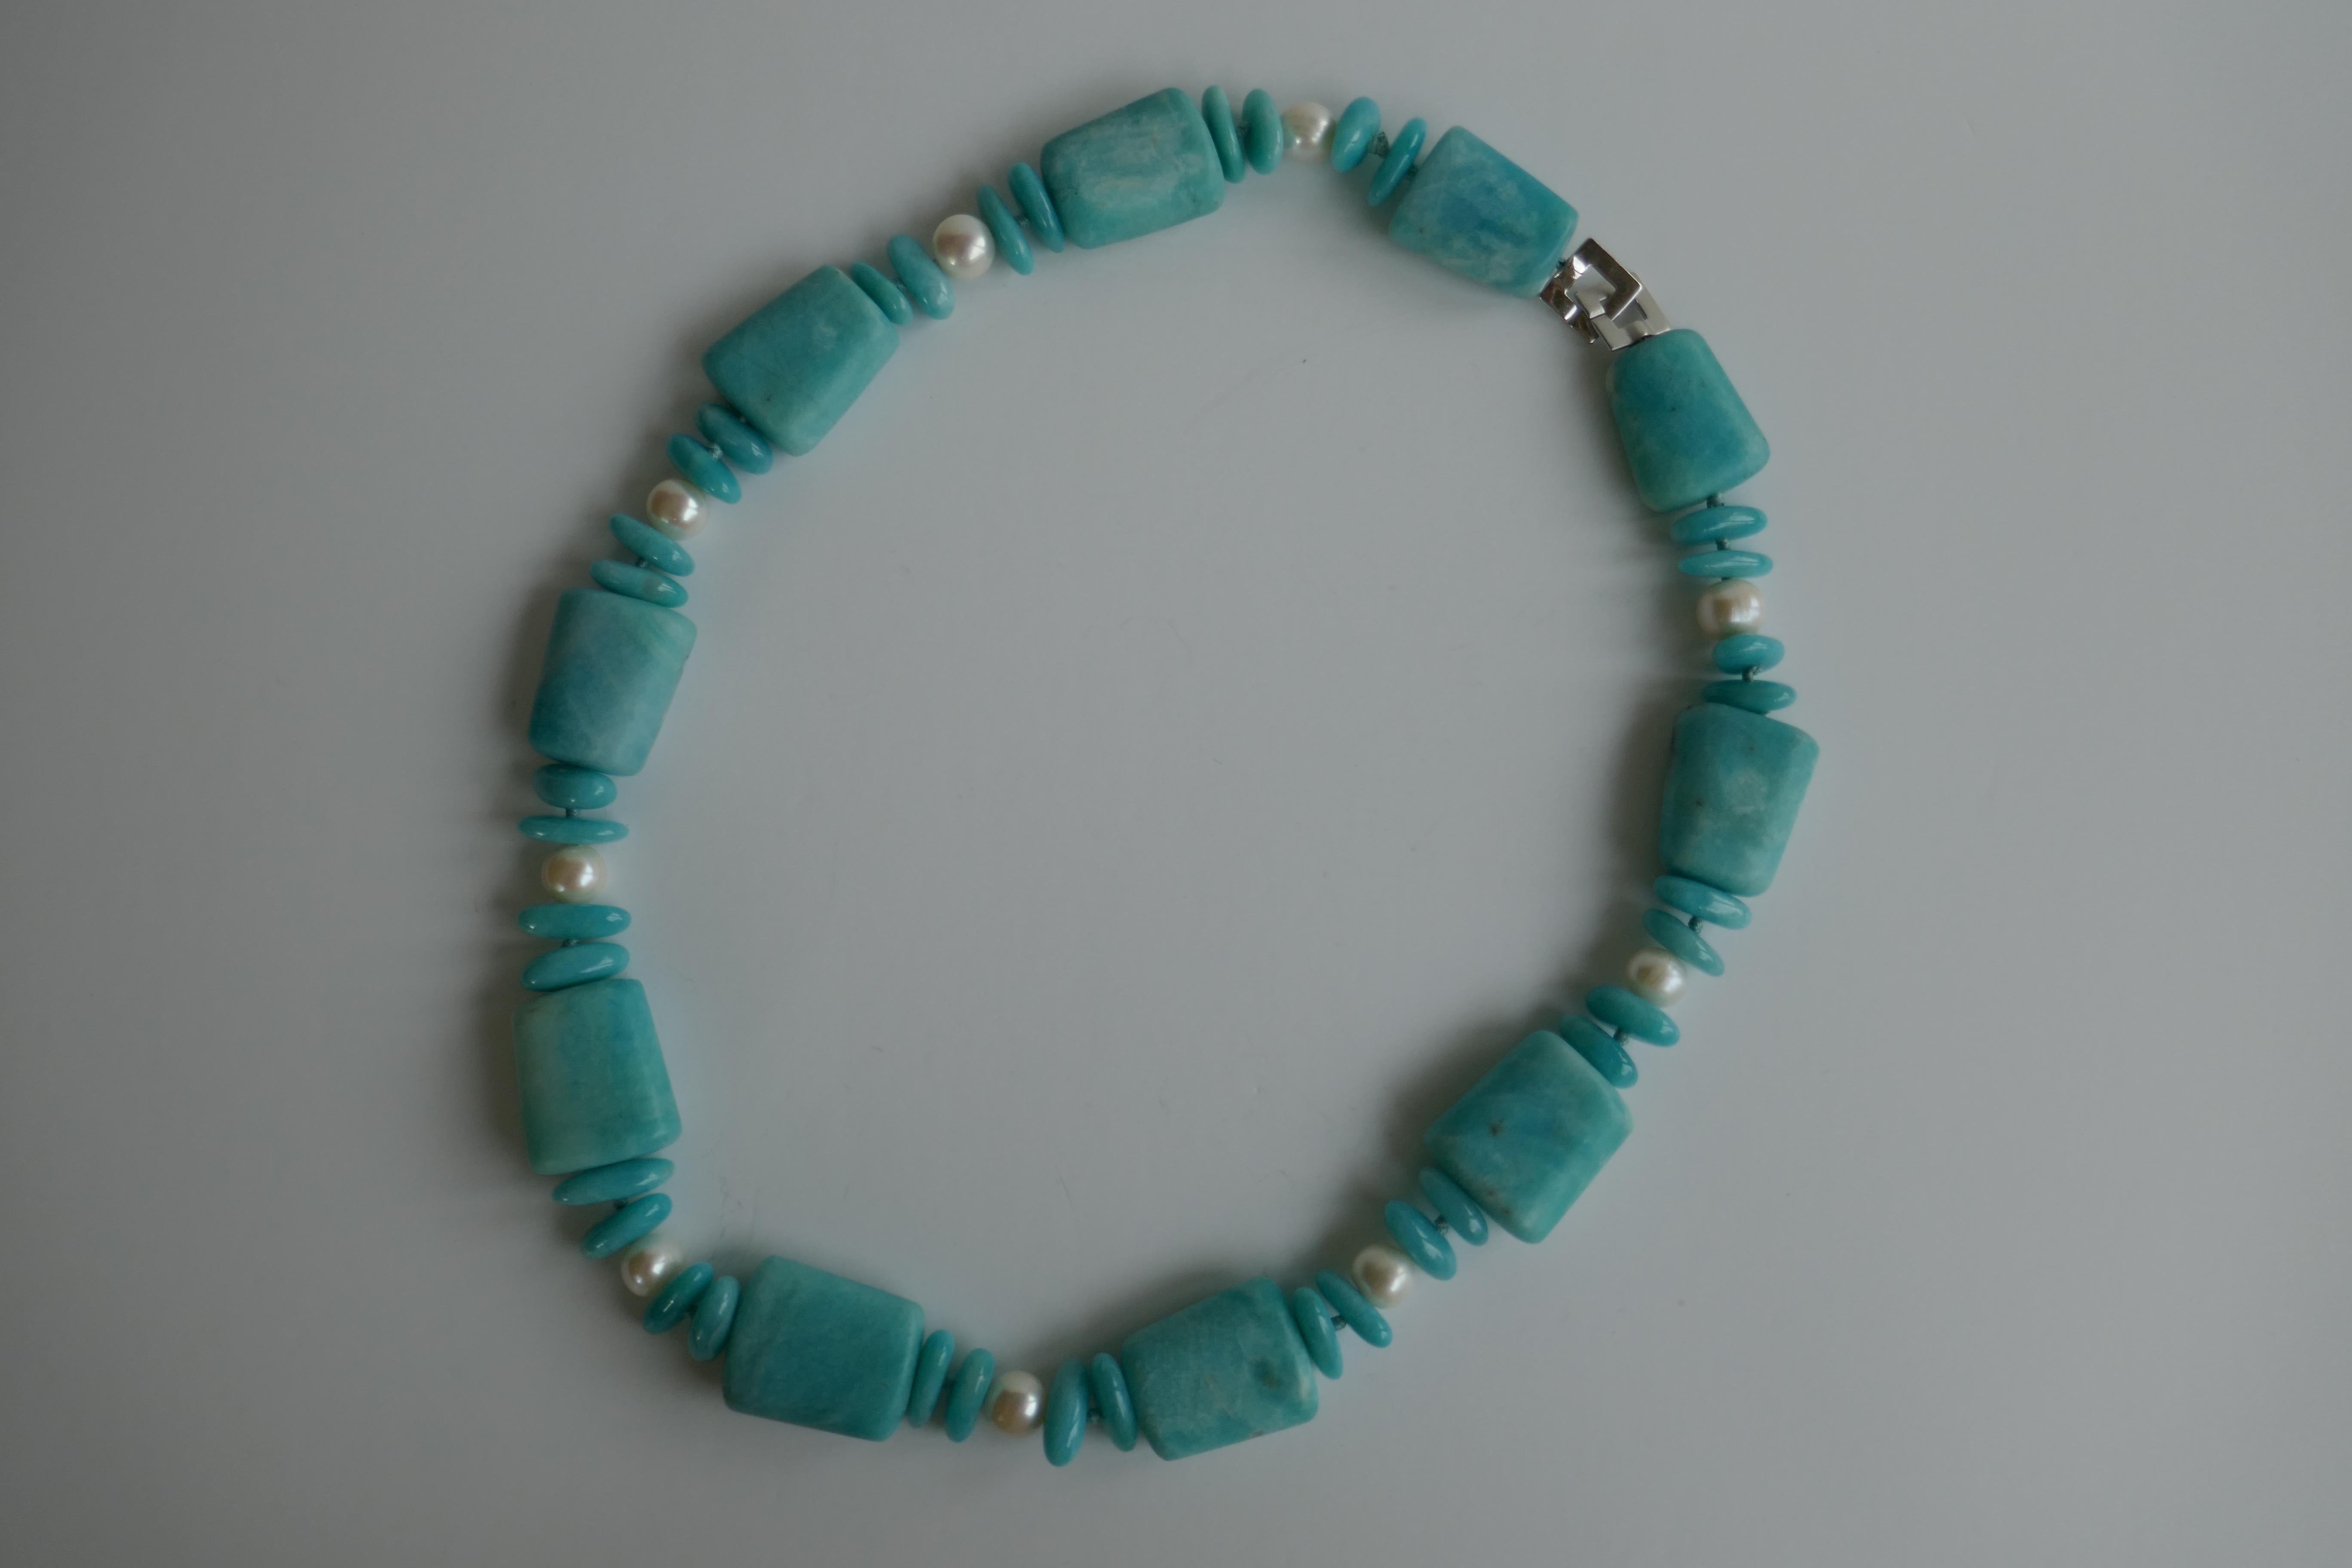 Love amazonite, similar to turquoise in color. The play of this necklace is in the matted amazonite with the polished amazonite nuggets (18-20mm) and the white cultured fresh water pearls with a 925 sterling silver clasp. It's a statement necklace